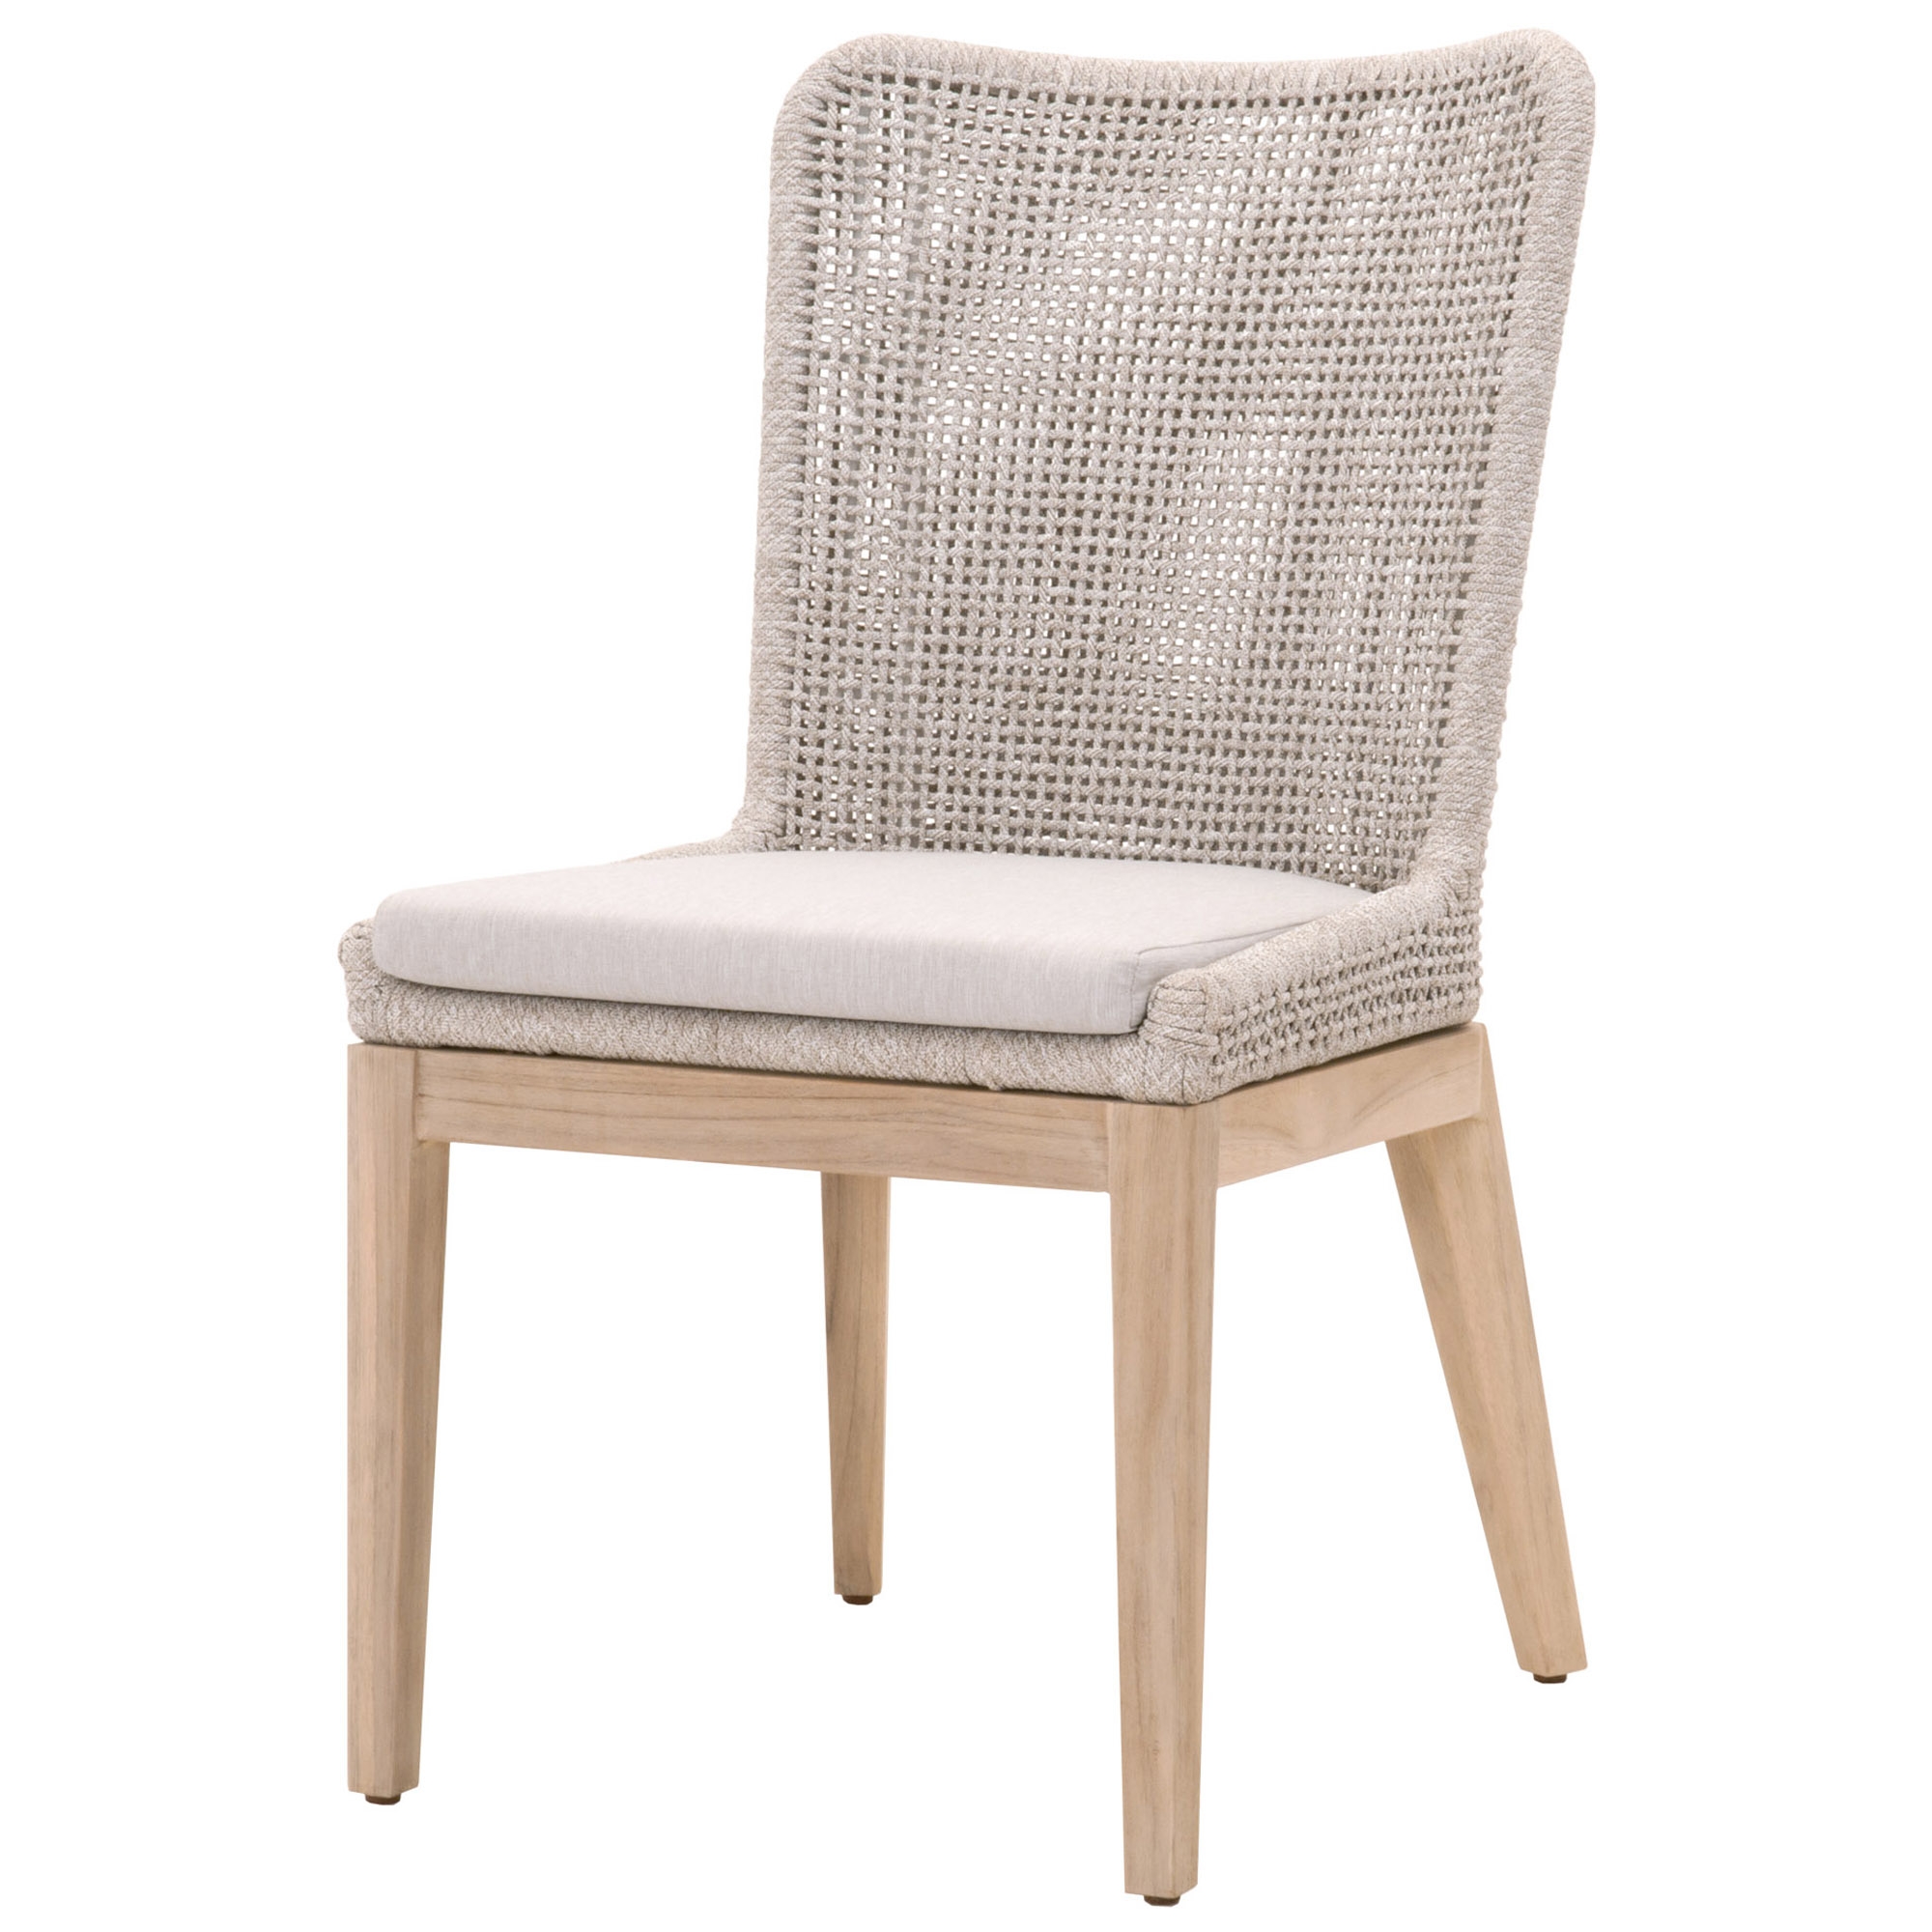 Mesh Outdoor Dining Chair, Gray, Set of 2 - Image 0